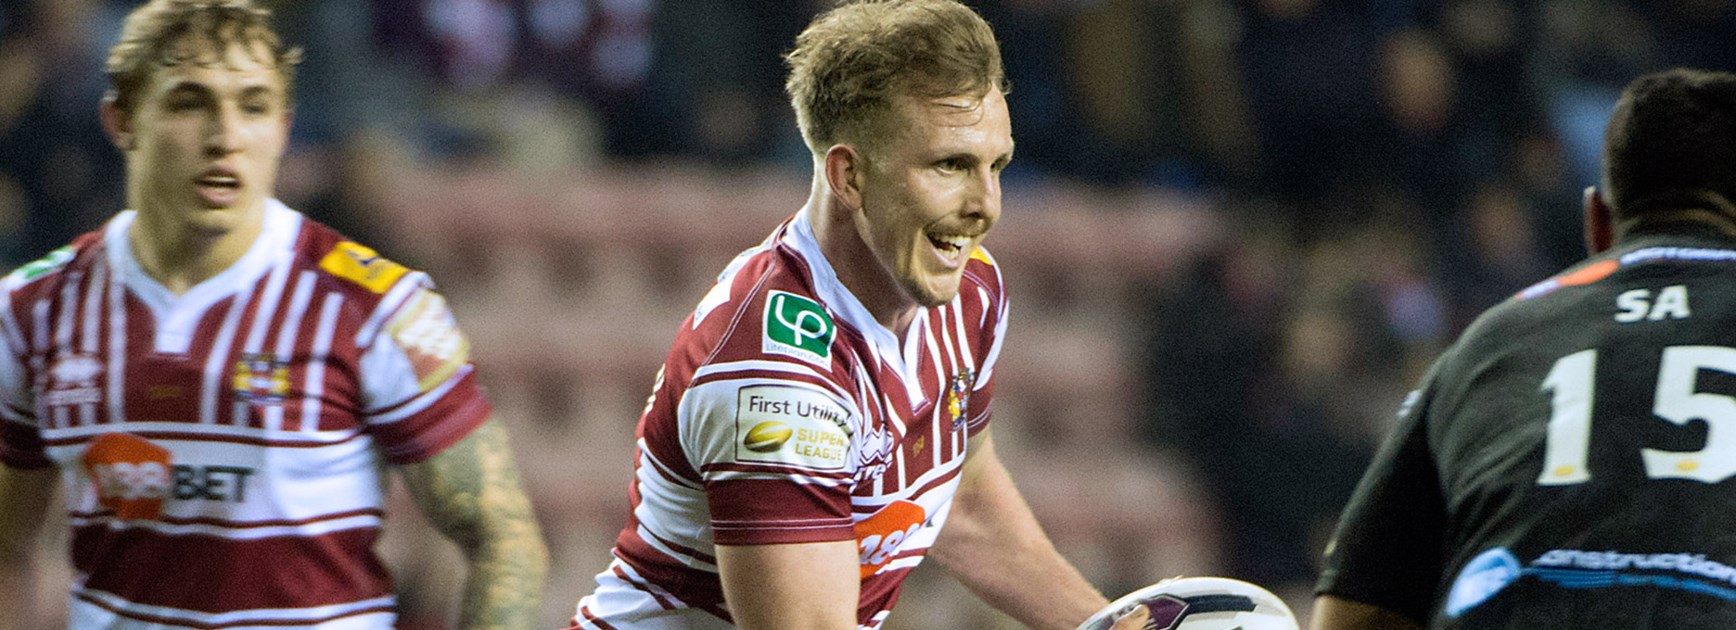 Wigan utility back Dan Sarginson has signed a two-year deal with the Titans.